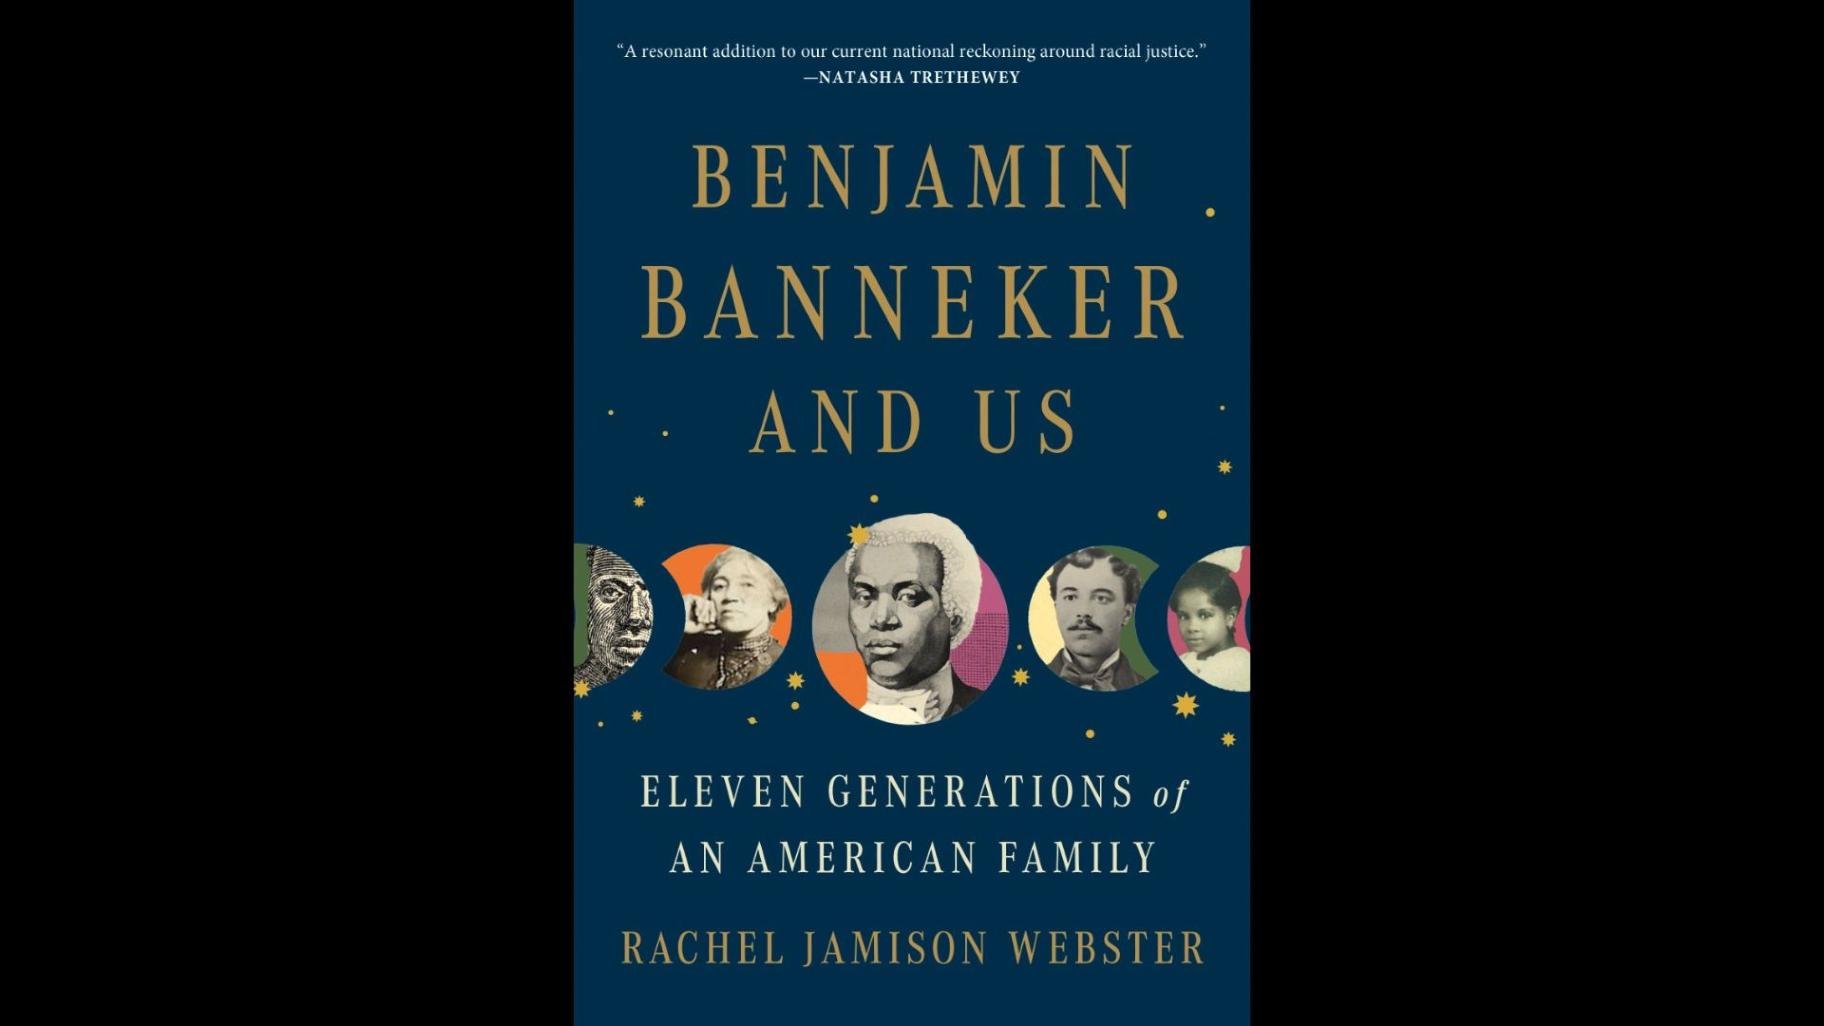 “Benjamin Banneker and Us: Eleven Generations of an American Family” by Rachel Jamison Webster. 